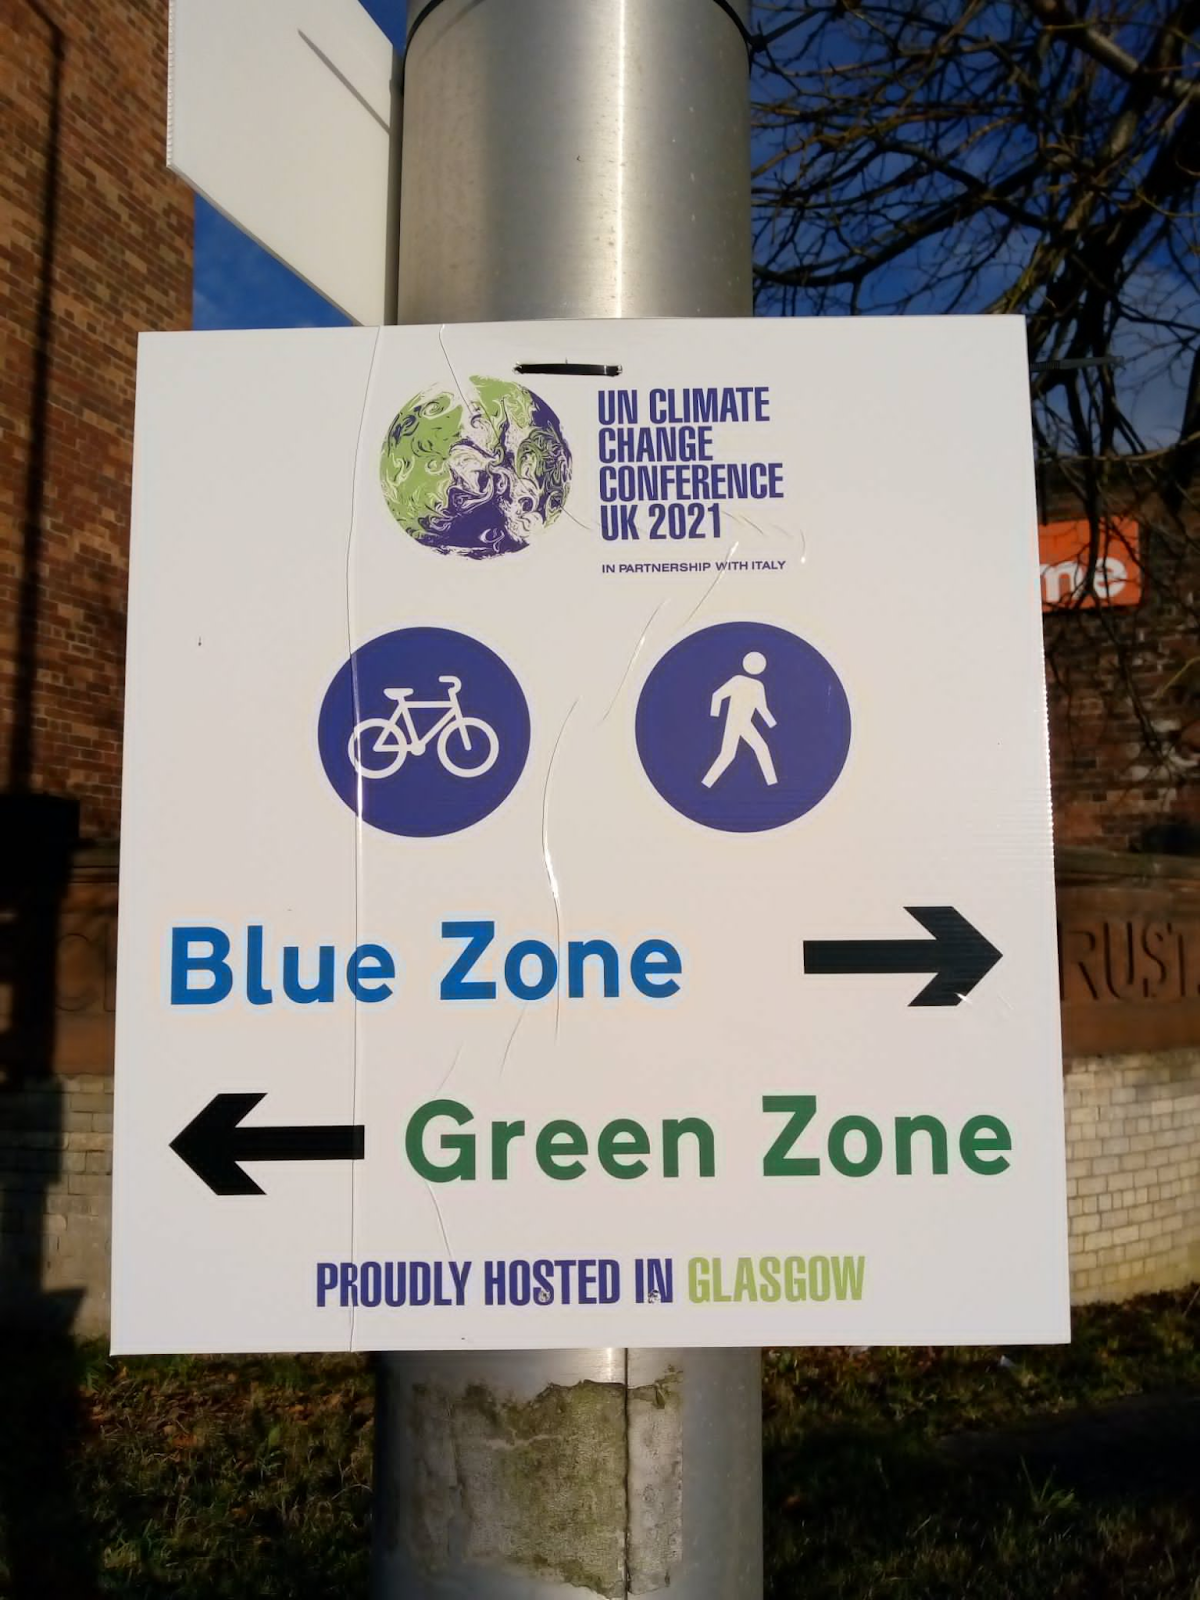 Blue Zone and Green Zone at COP26